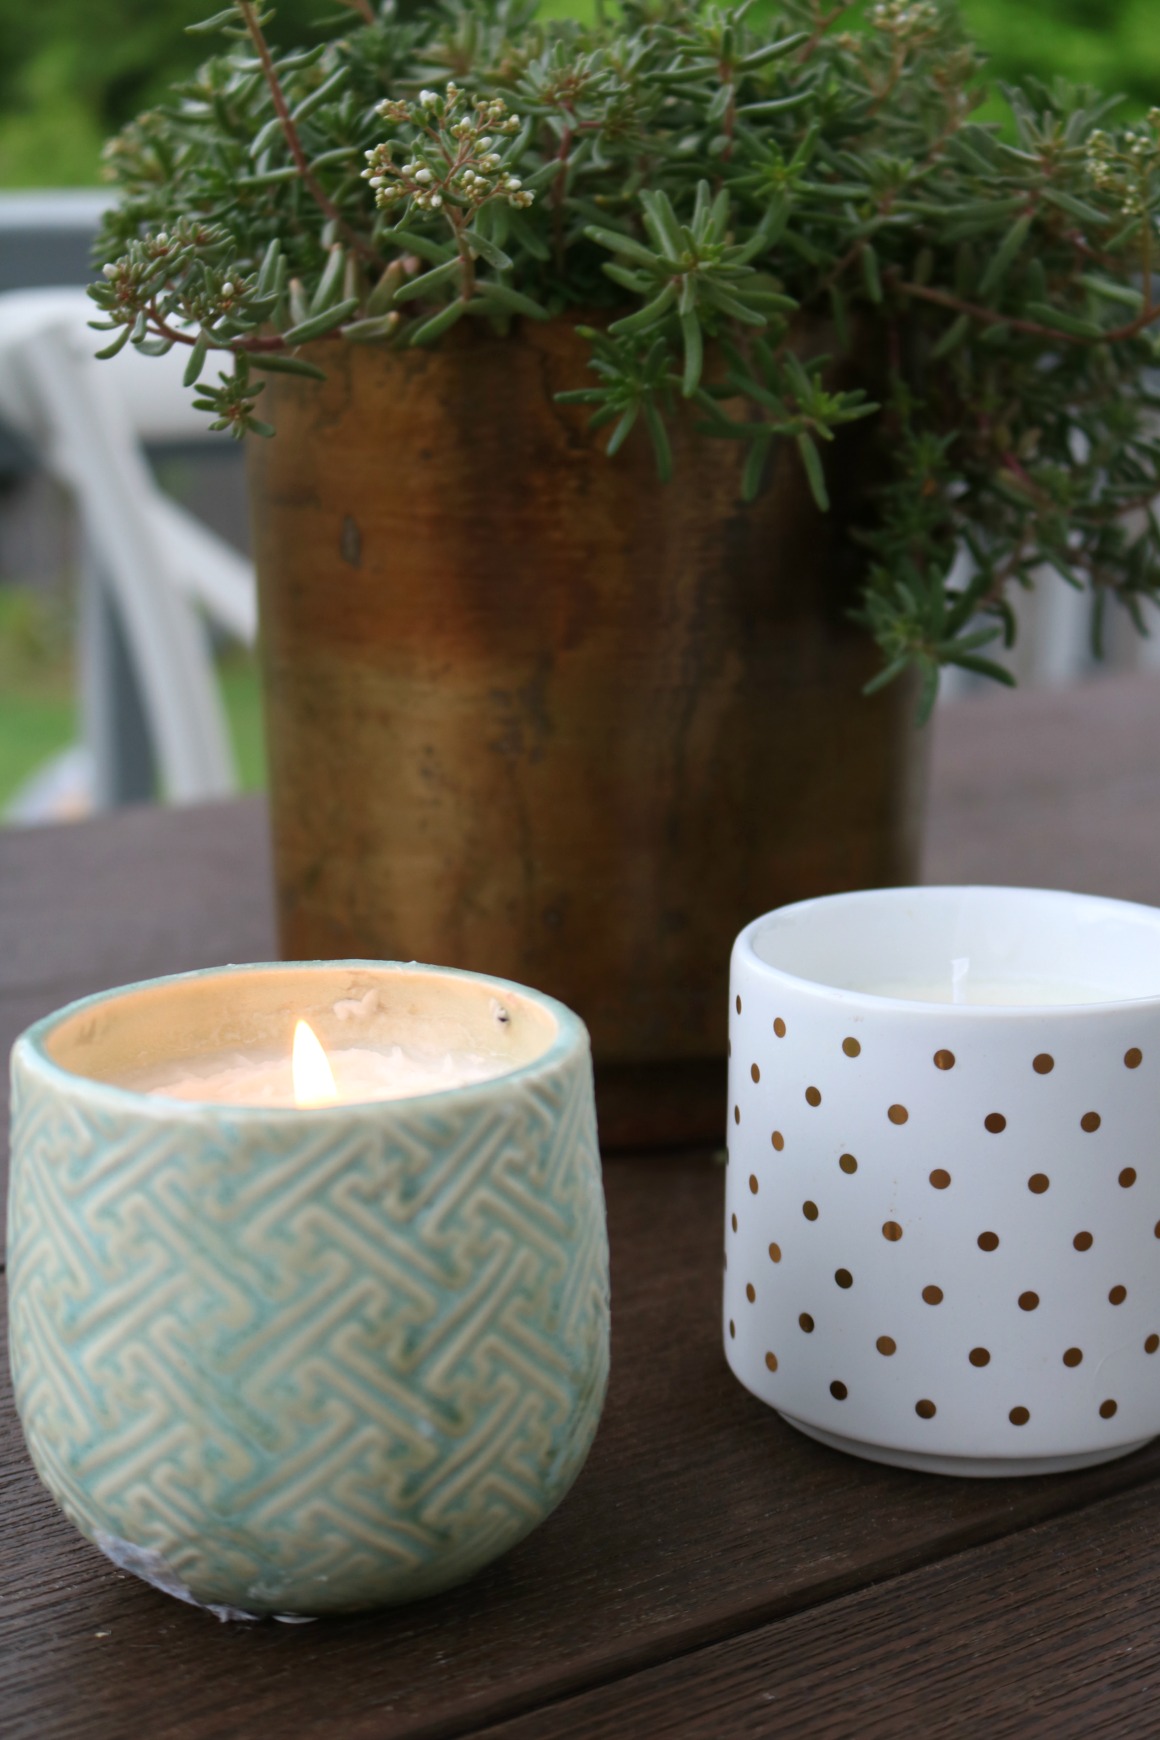 How to make Natural Candles- The EASY way!